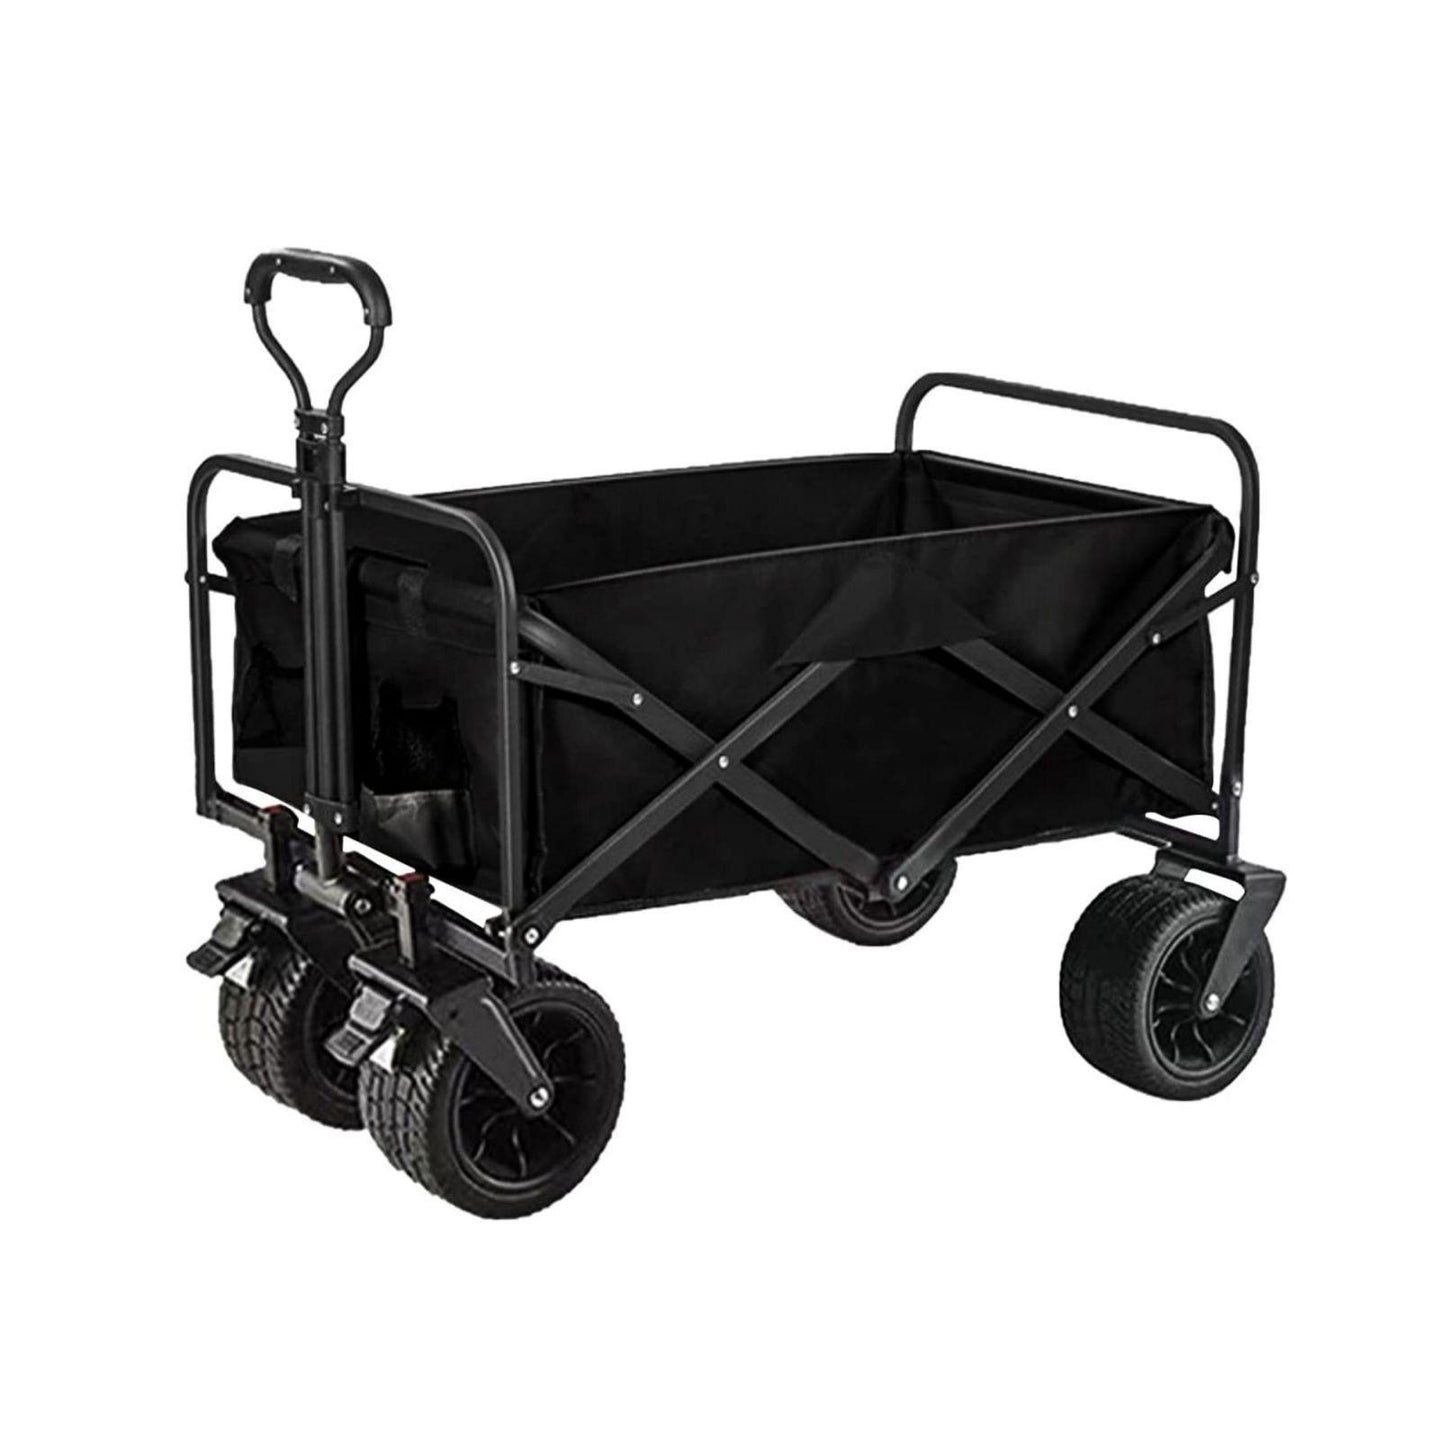 Buy 1PC Foldable Shopping Cart ( Black ), Heavy Duty Collapsible Wagon with All-Terrain 10cm Wheels, Load 150kg, Portable 160 Liter Large Capacity Beach Wagon, Camping, Garden, Beach Day, Picnics, Shopping, Outdoor Grocery Cart with Adjustable Handle discounted | Products On Sale Australia